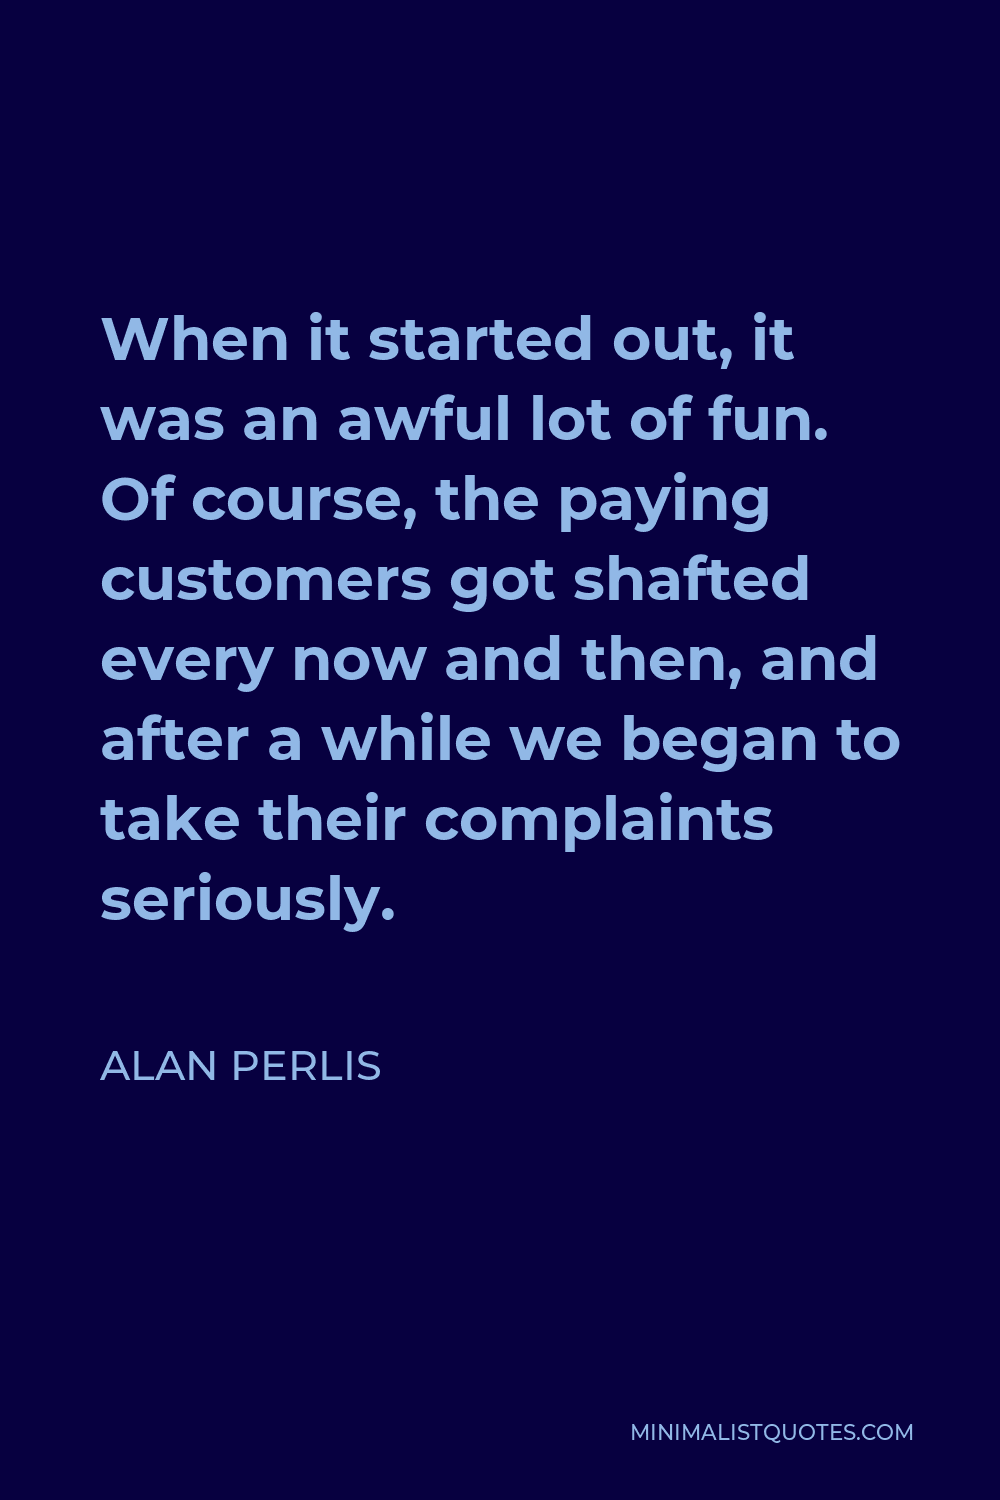 Alan Perlis Quote - When it started out, it was an awful lot of fun. Of course, the paying customers got shafted every now and then, and after a while we began to take their complaints seriously.